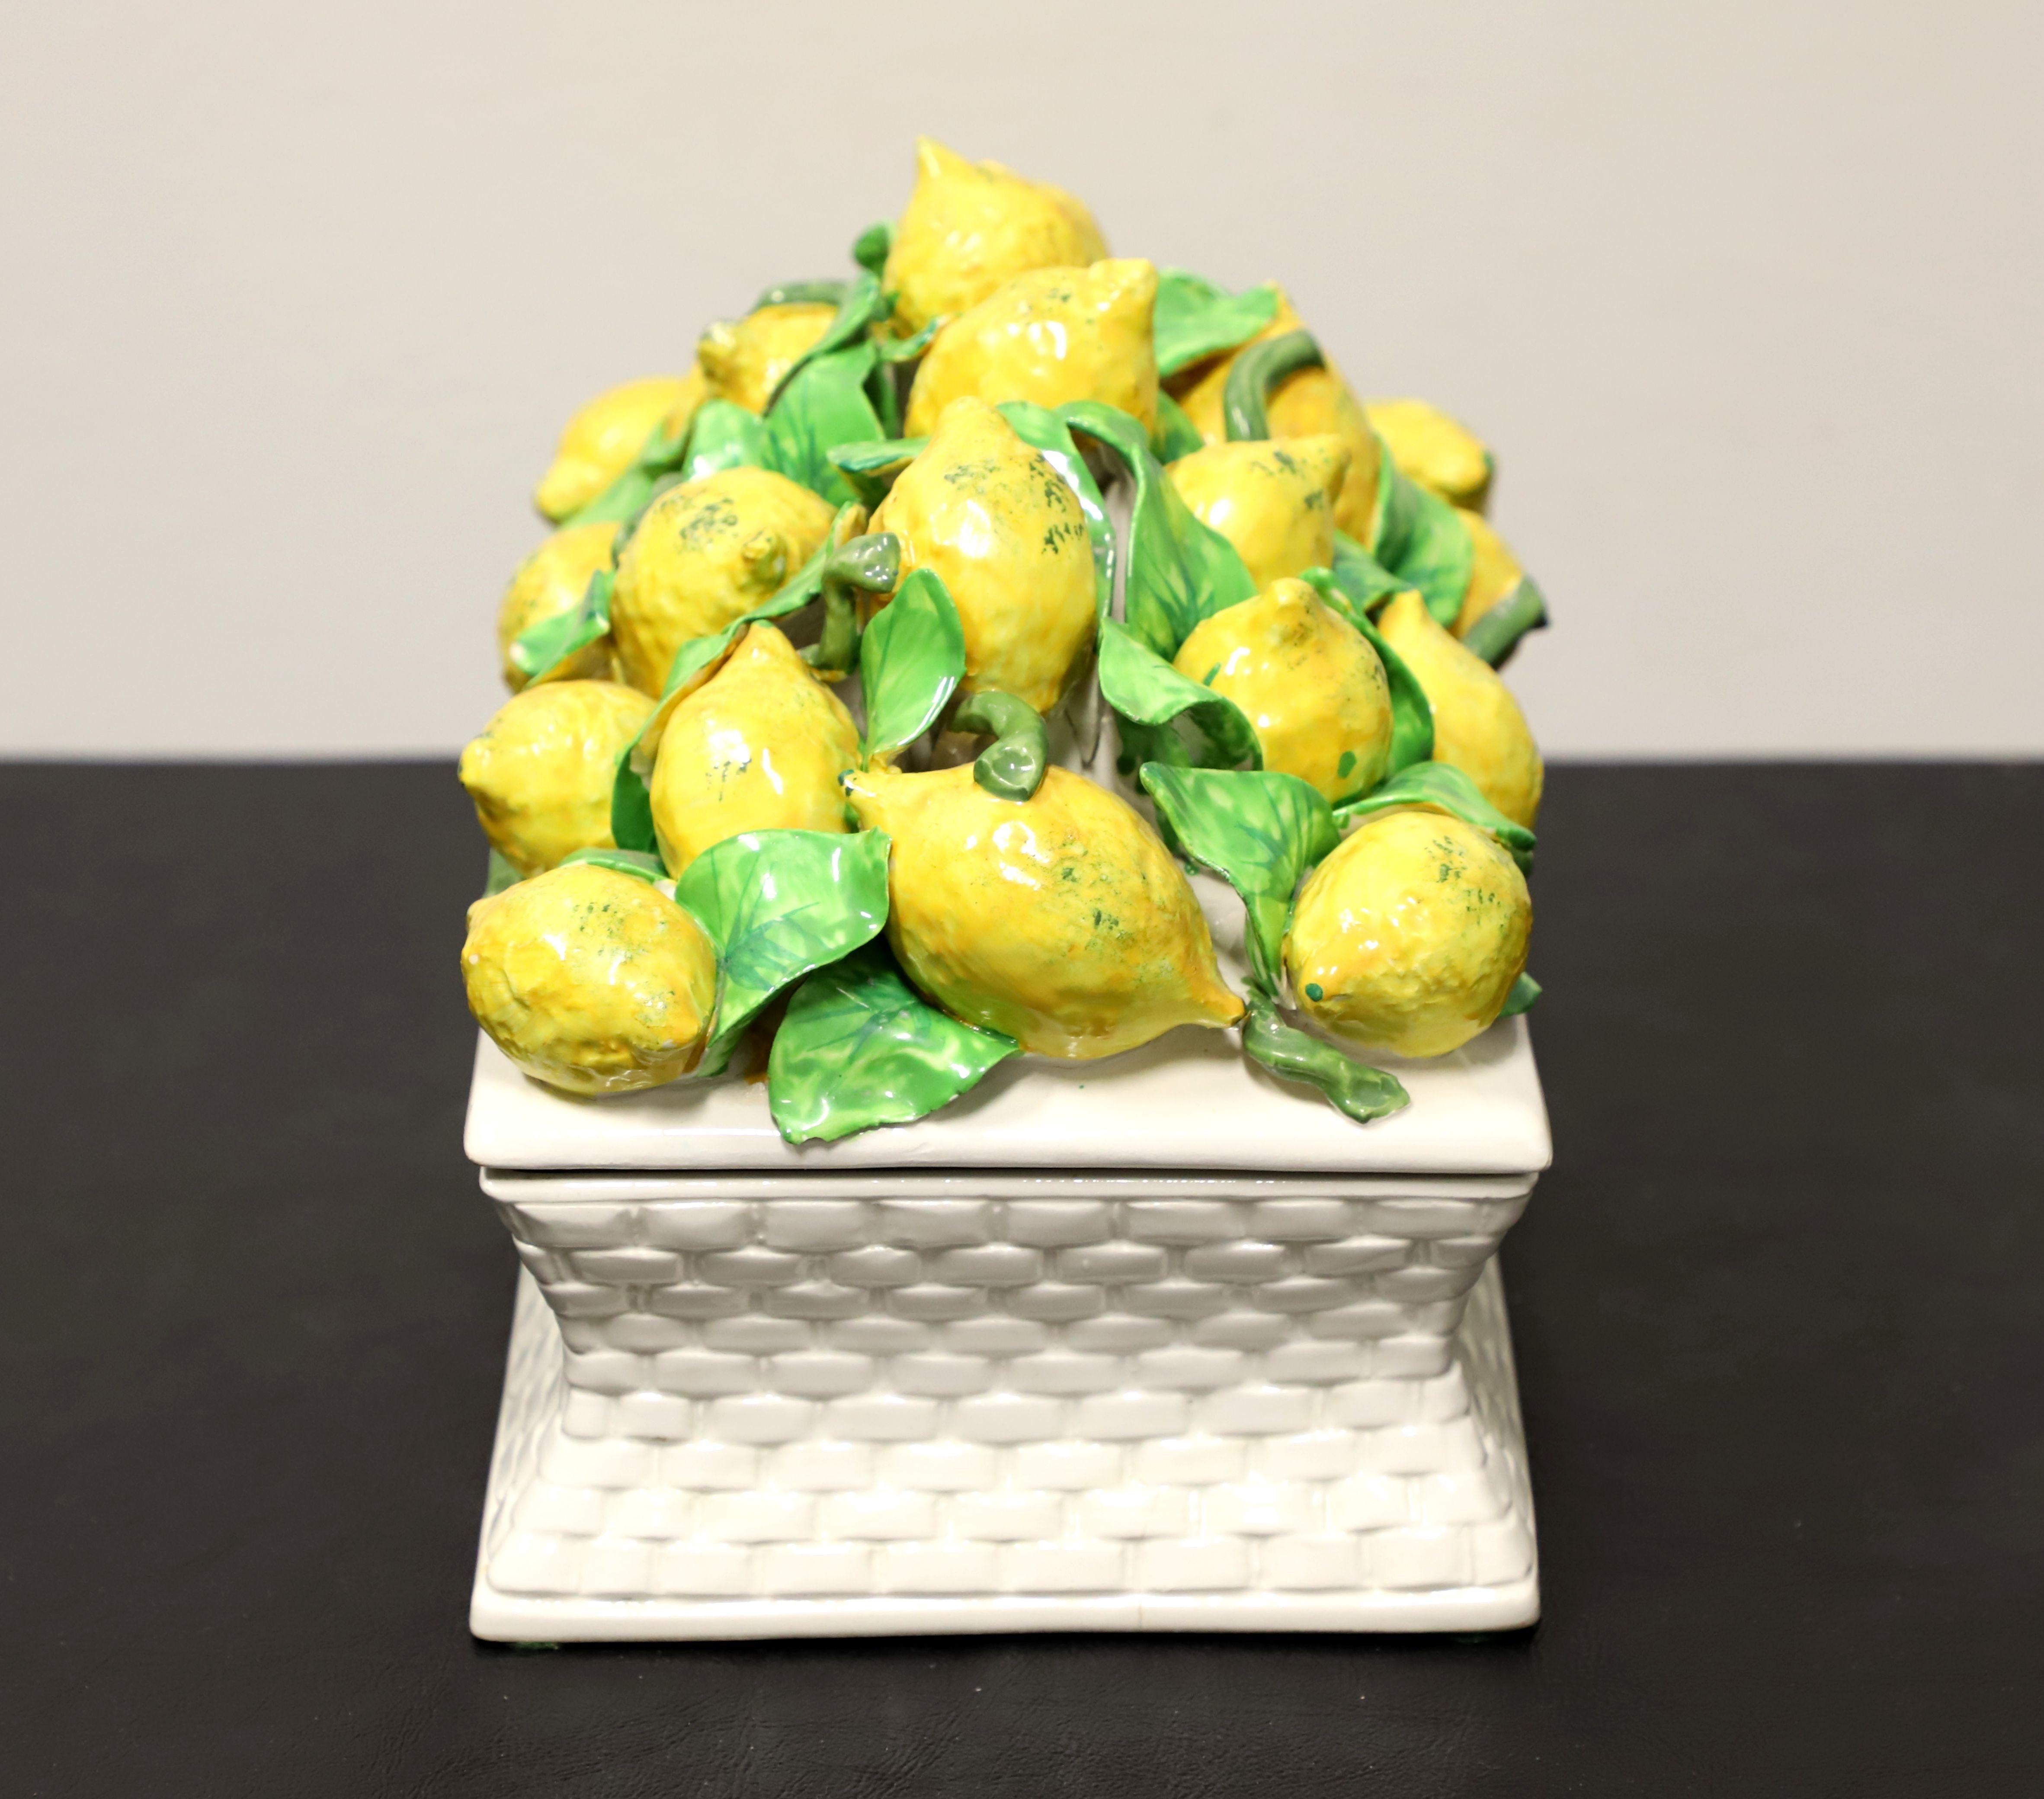 A Late 20th Century decorative porcelain centerpiece dish, unbranded. A basket weave design to lower porcelain dish and a collection of porcelain lemons and leaves to the lid. Rectangular in shape with a smooth interior for foods or trinkets. Made